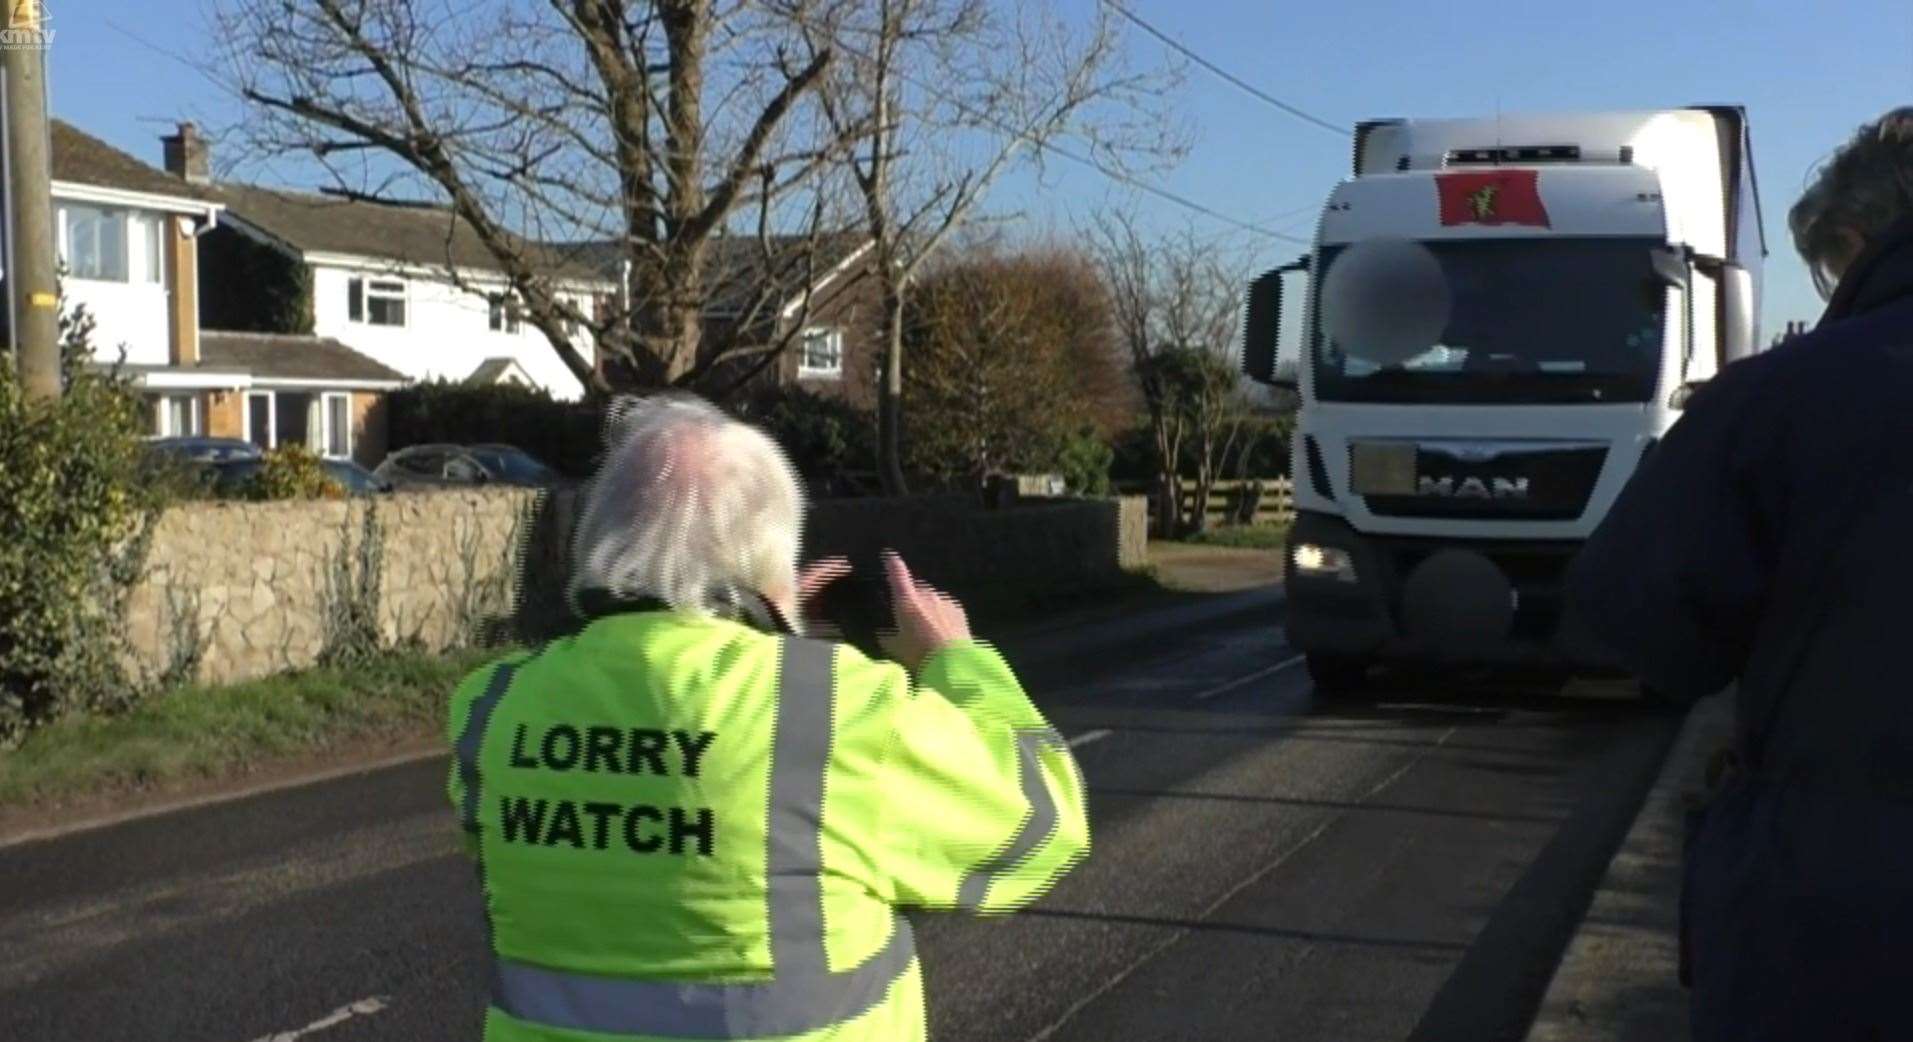 Villagers were stopping lorries in Leeds last Tuesday